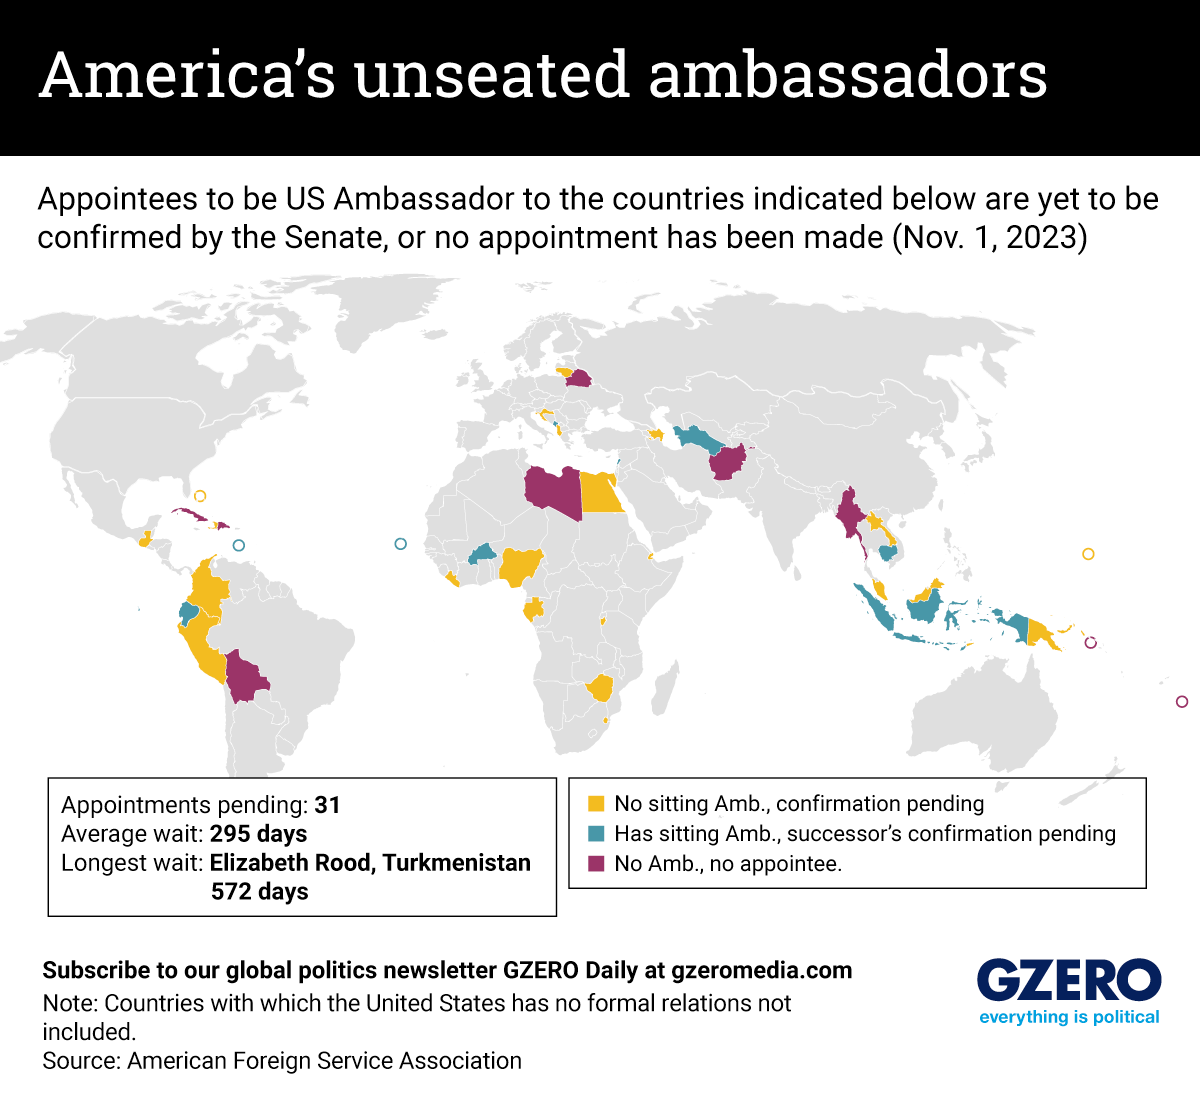 The Graphic Truth: America’s unseated ambassadors